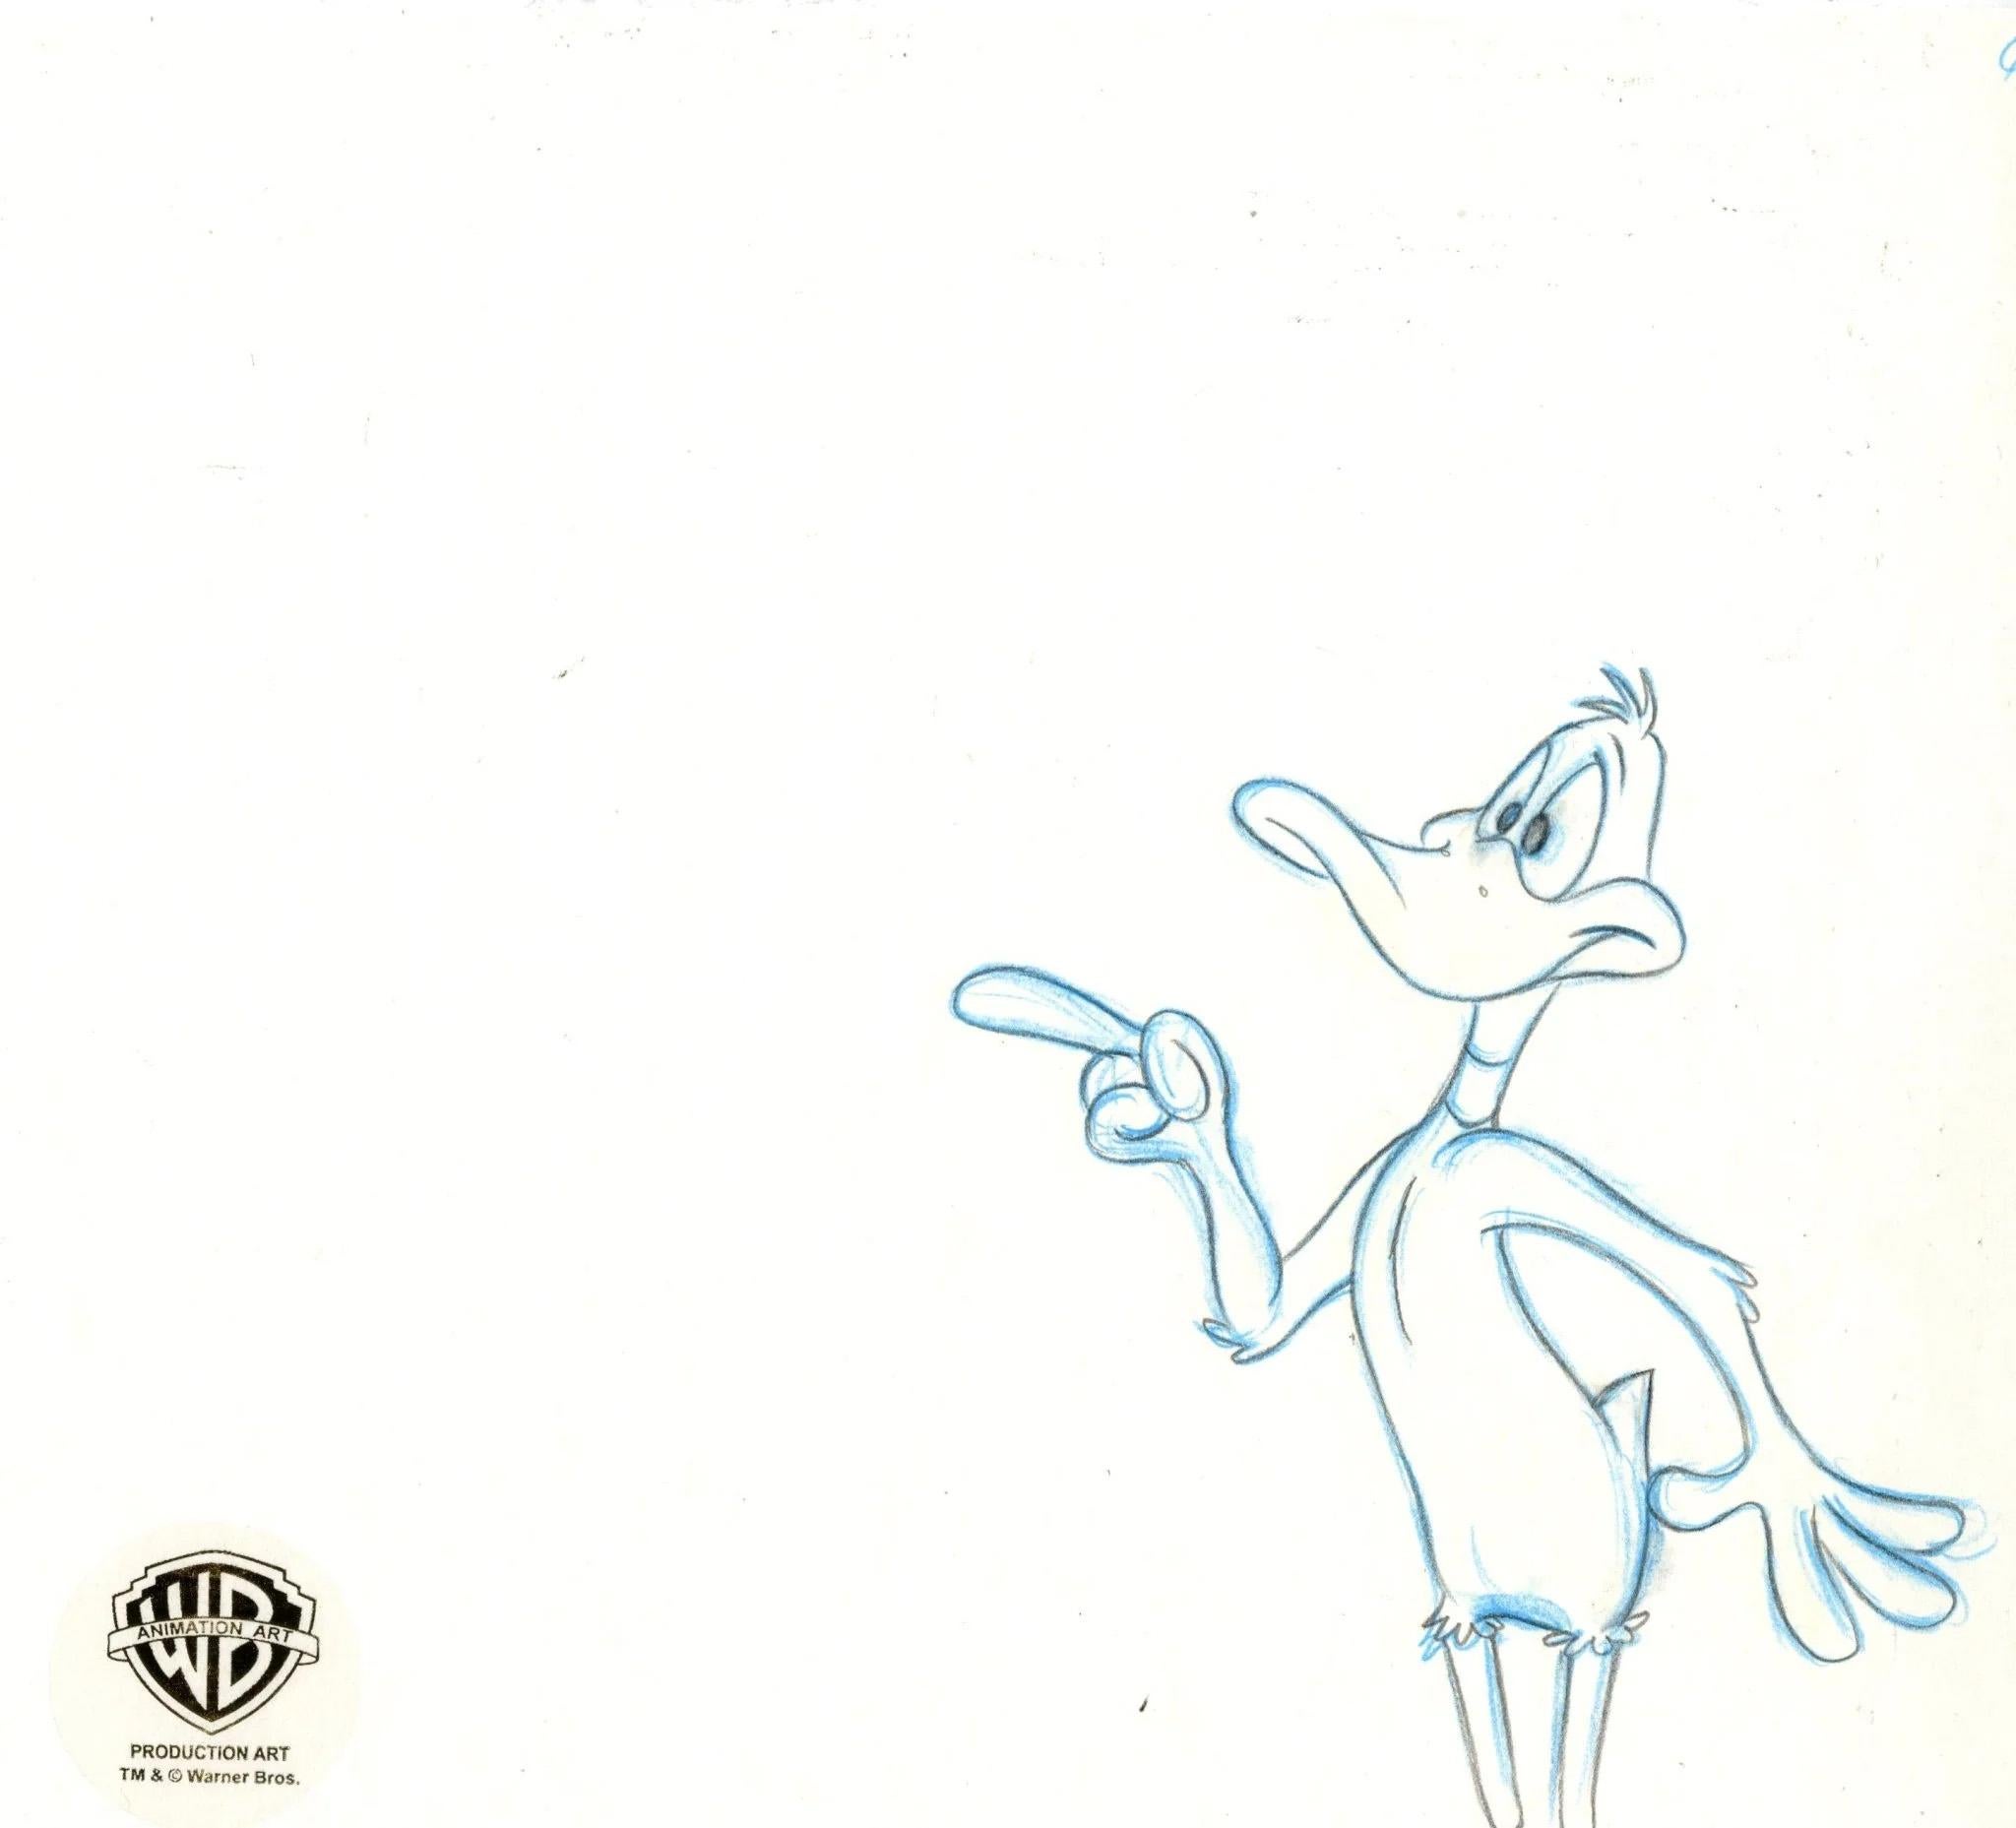 Looney Tunes Original Production Drawing: Daffy Duck - Art by Looney Tunes Studio Artists